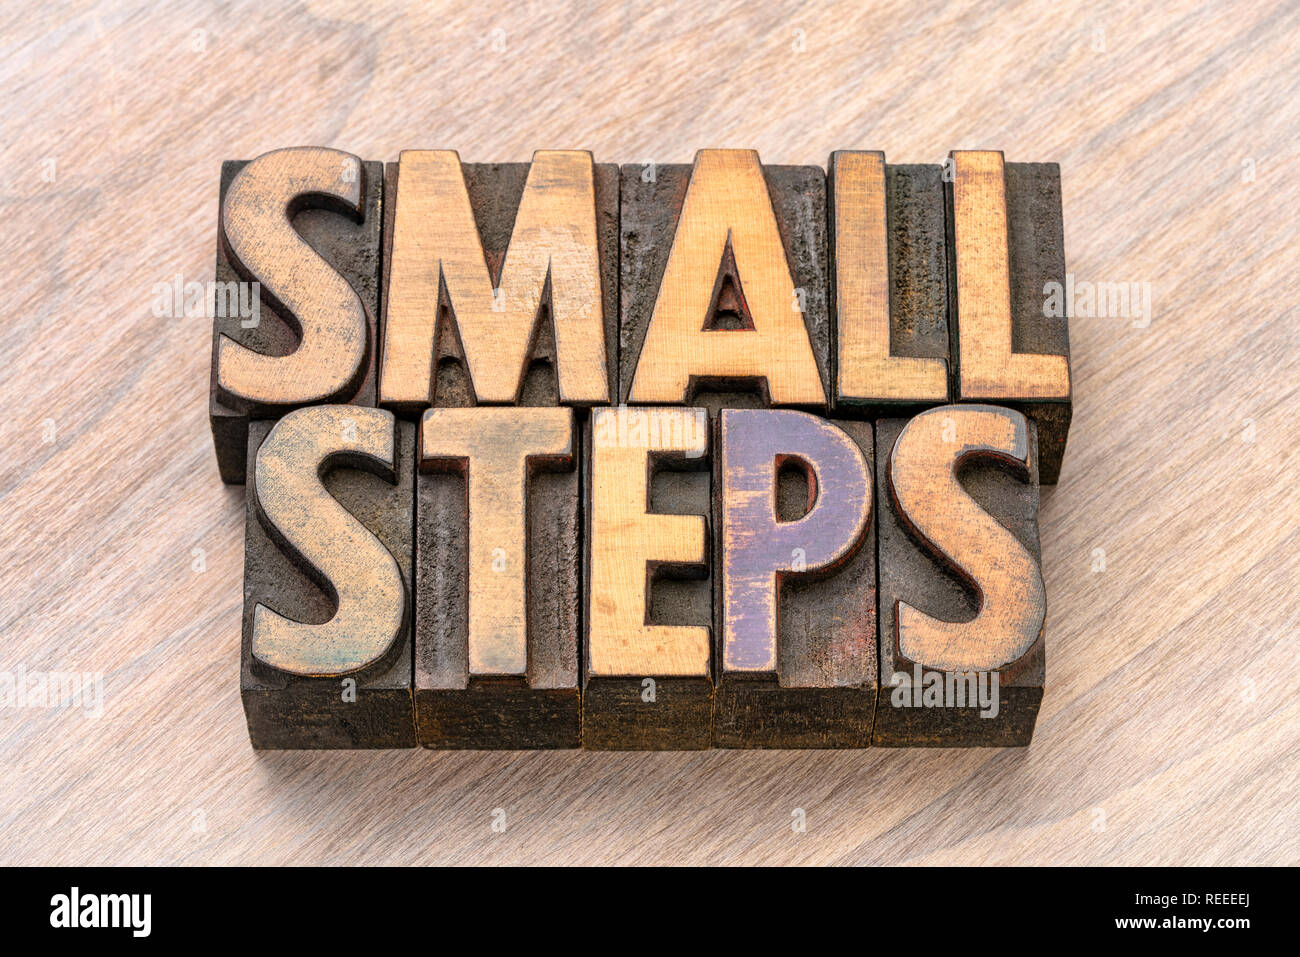 small steps word abstract in vintage letterpress wood type printing blocks Stock Photo